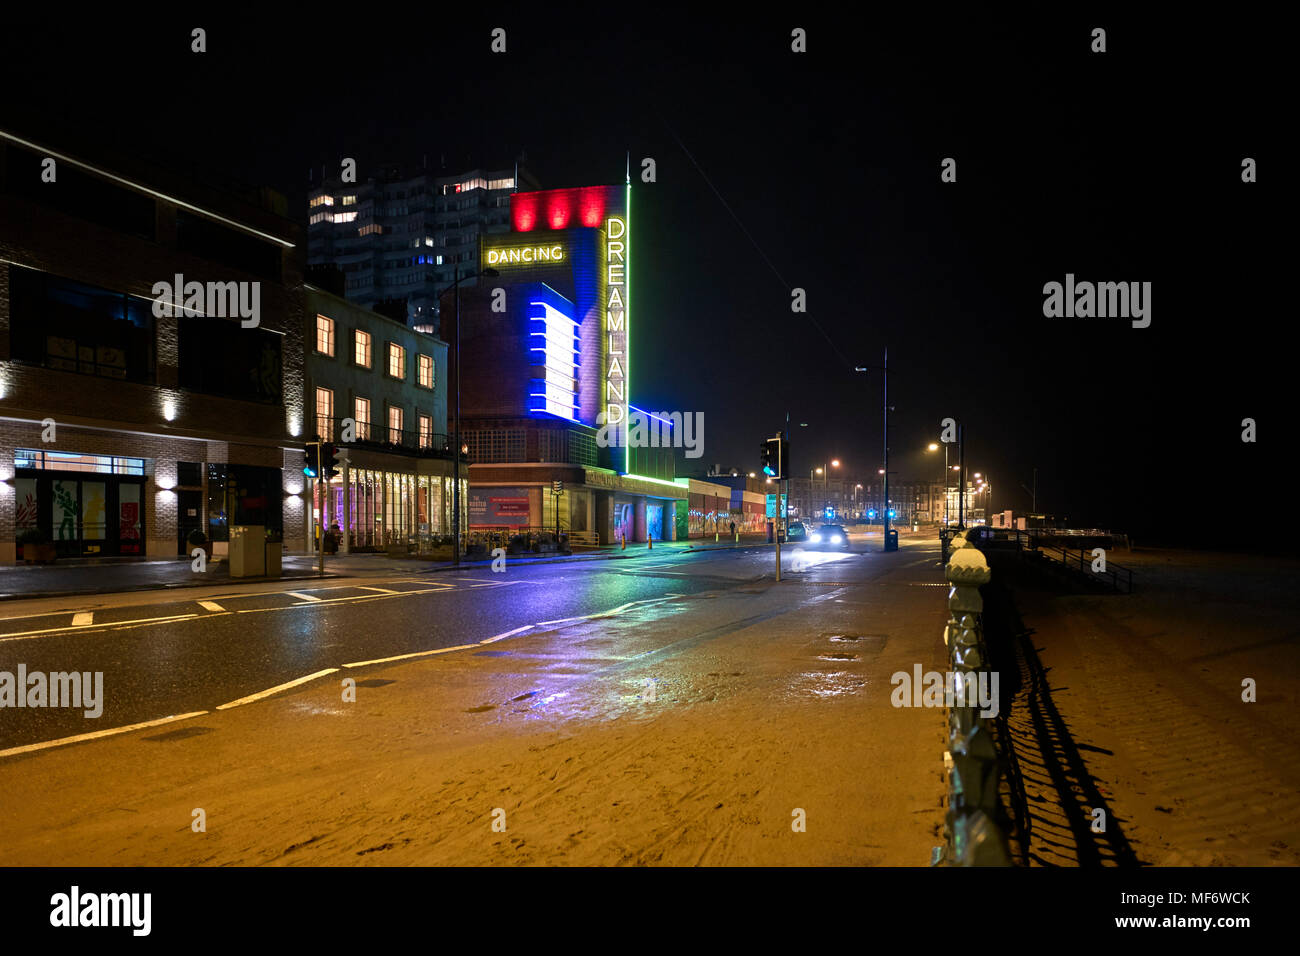 Margate seafront at night showing the Dreamland building lit up and sand  across the pavement Stock Photo - Alamy